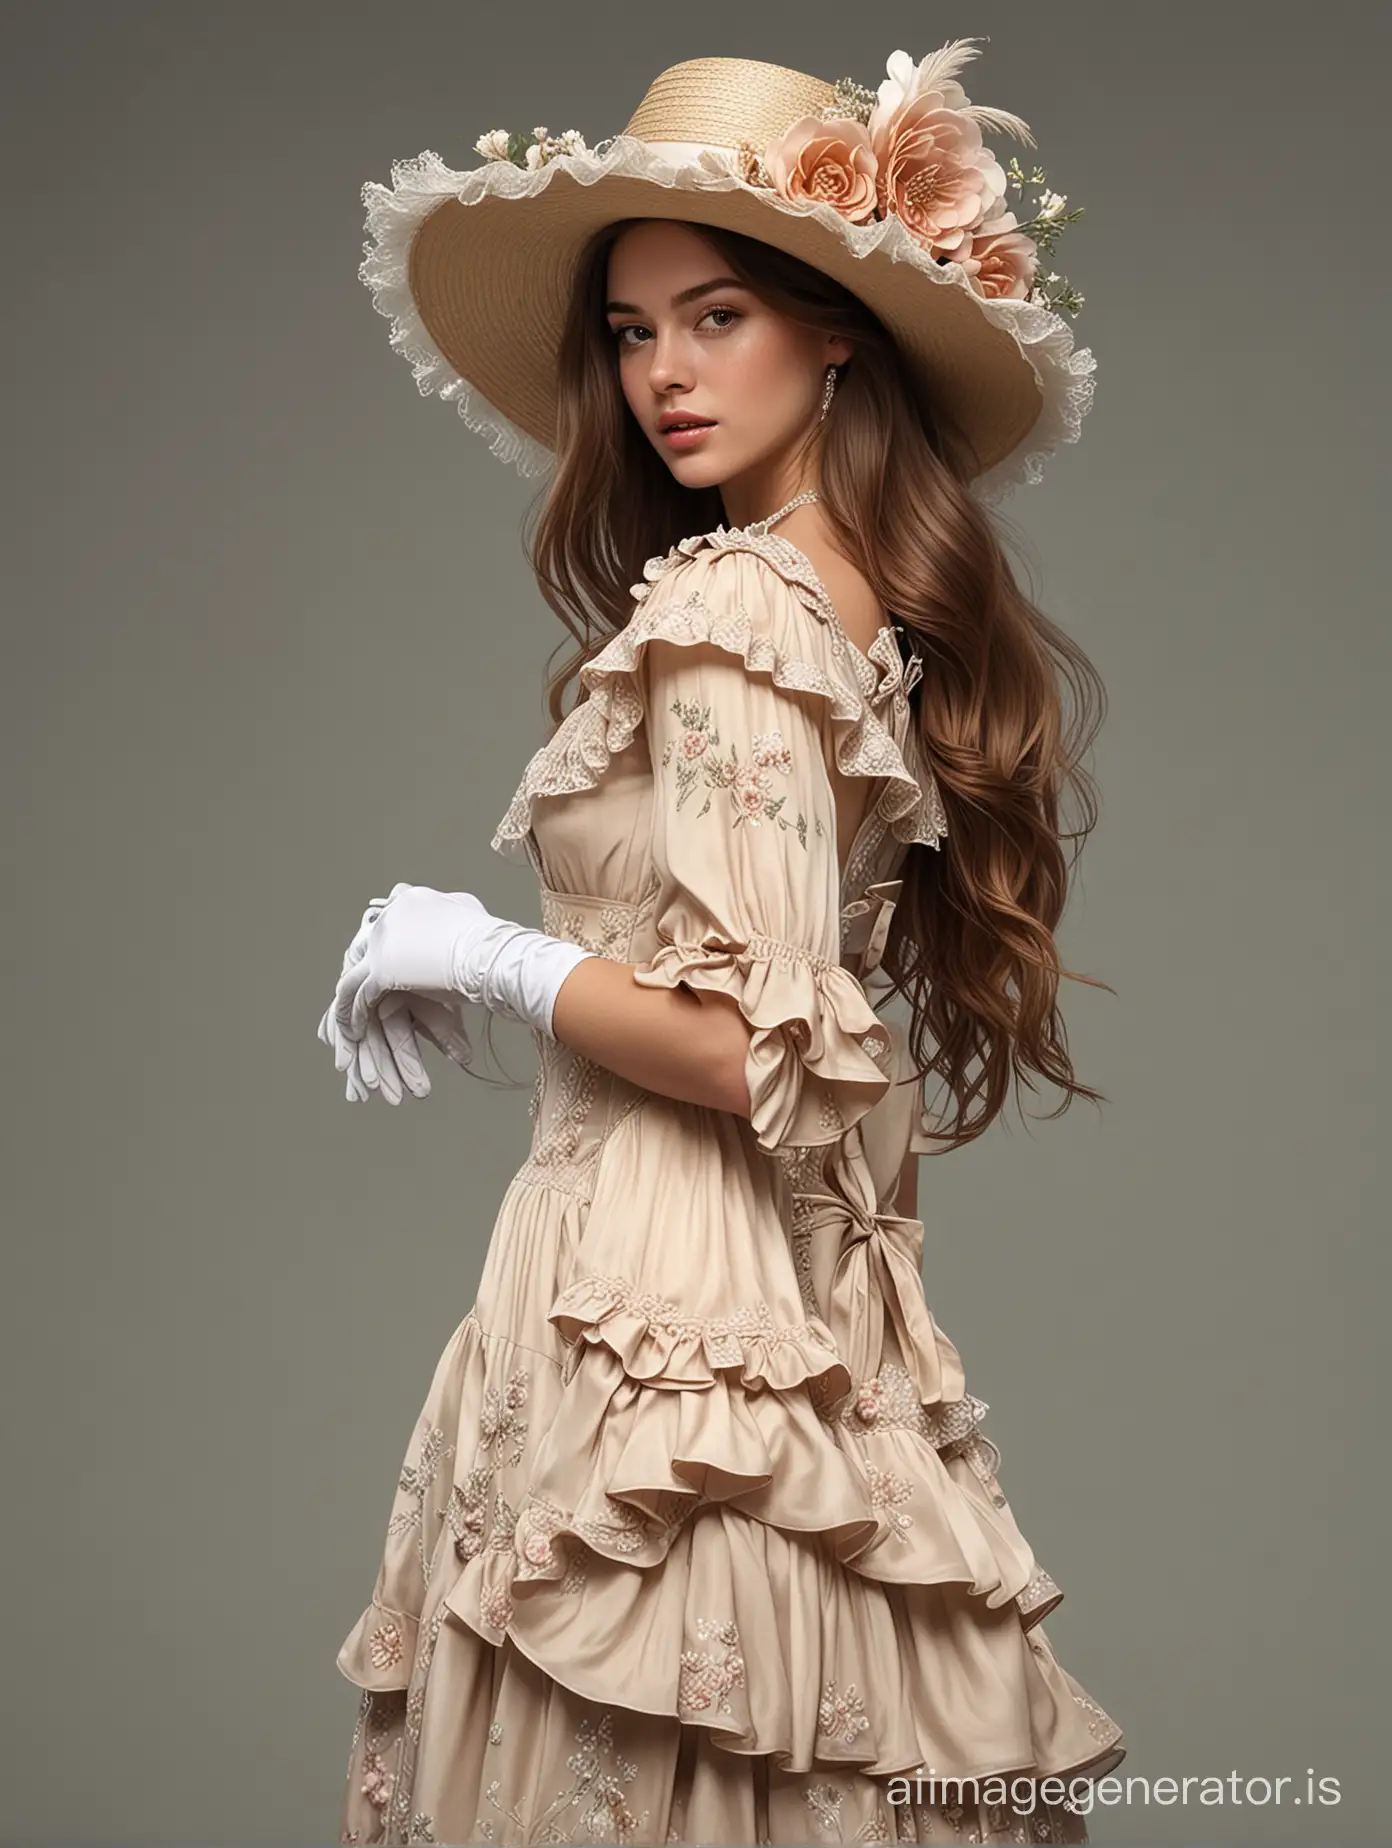 Elegant-Girl-in-Frilled-Dress-and-Hat-with-Delicate-Flower-Necktie